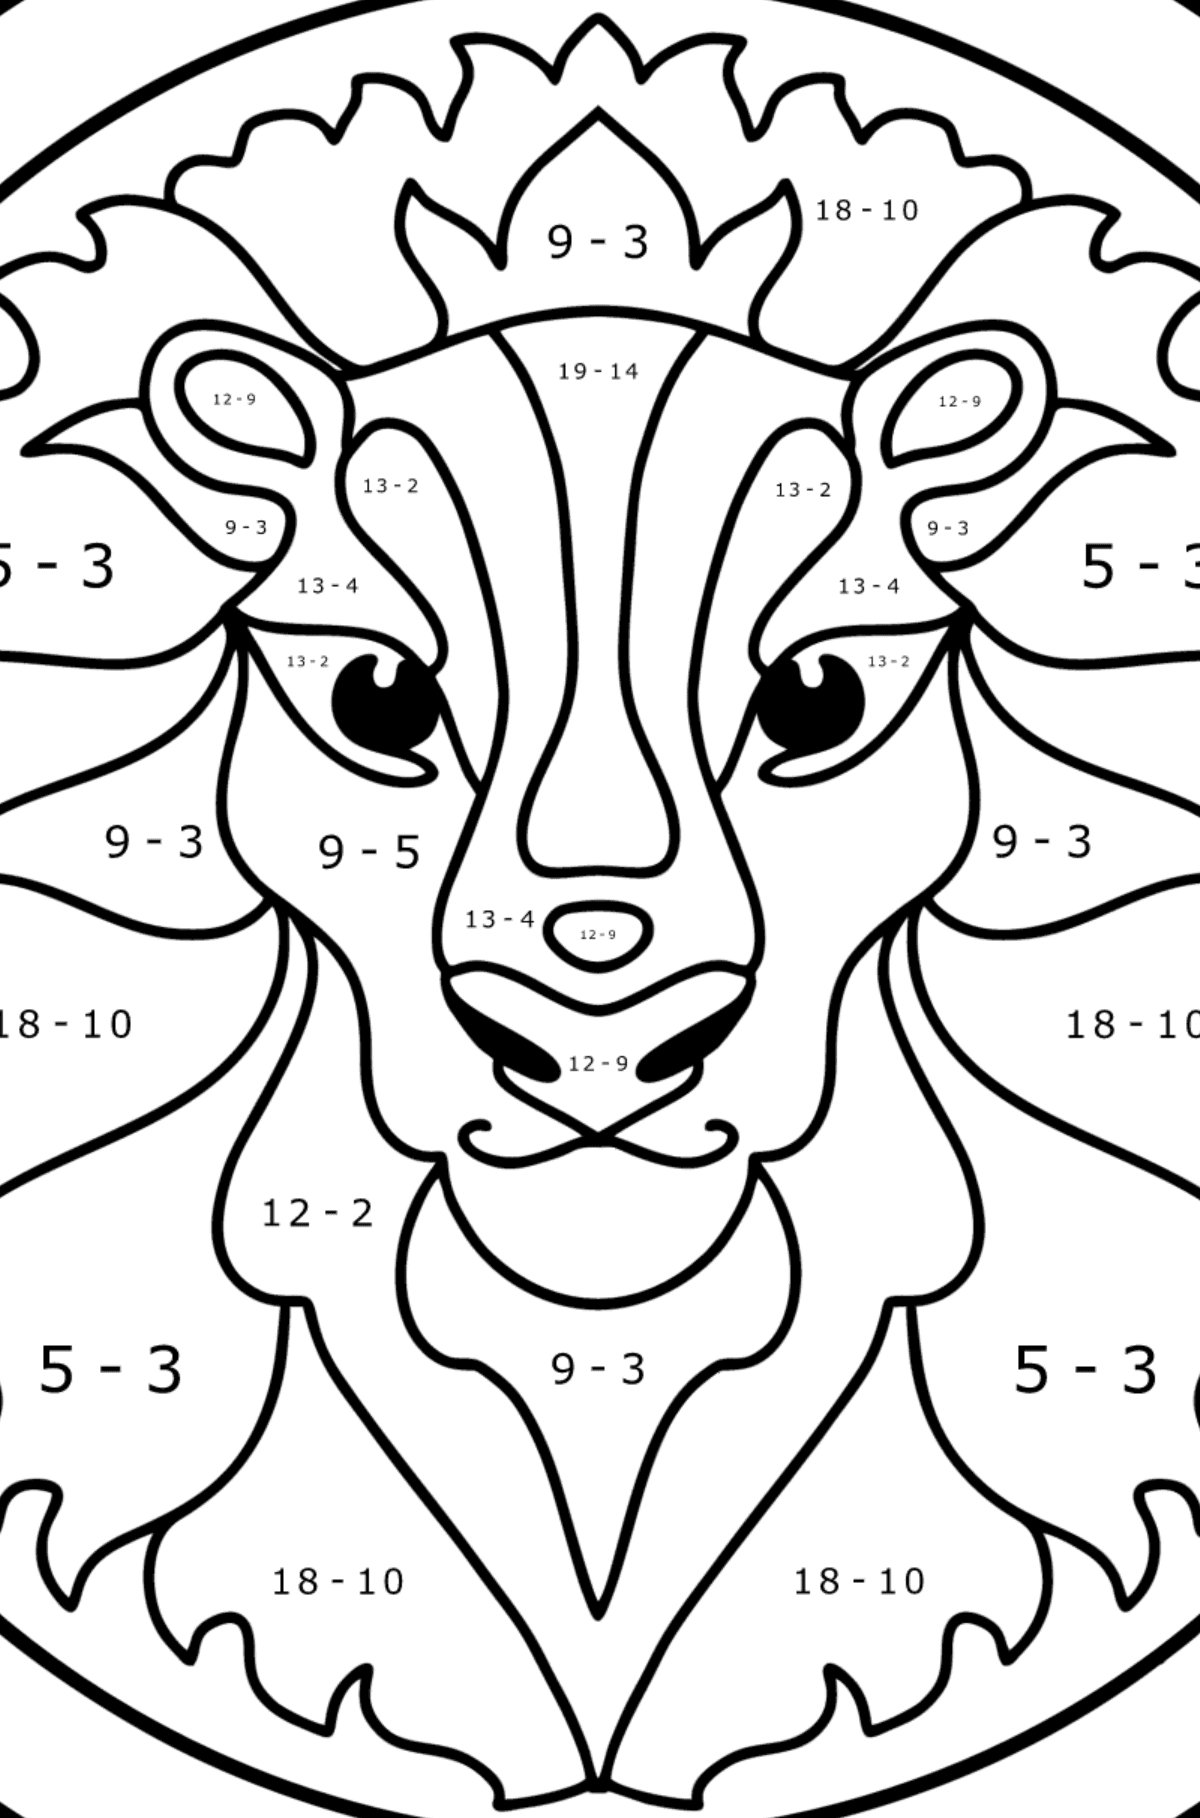 Coloring page for kids - zodiac sign Leo - Math Coloring - Subtraction for Kids